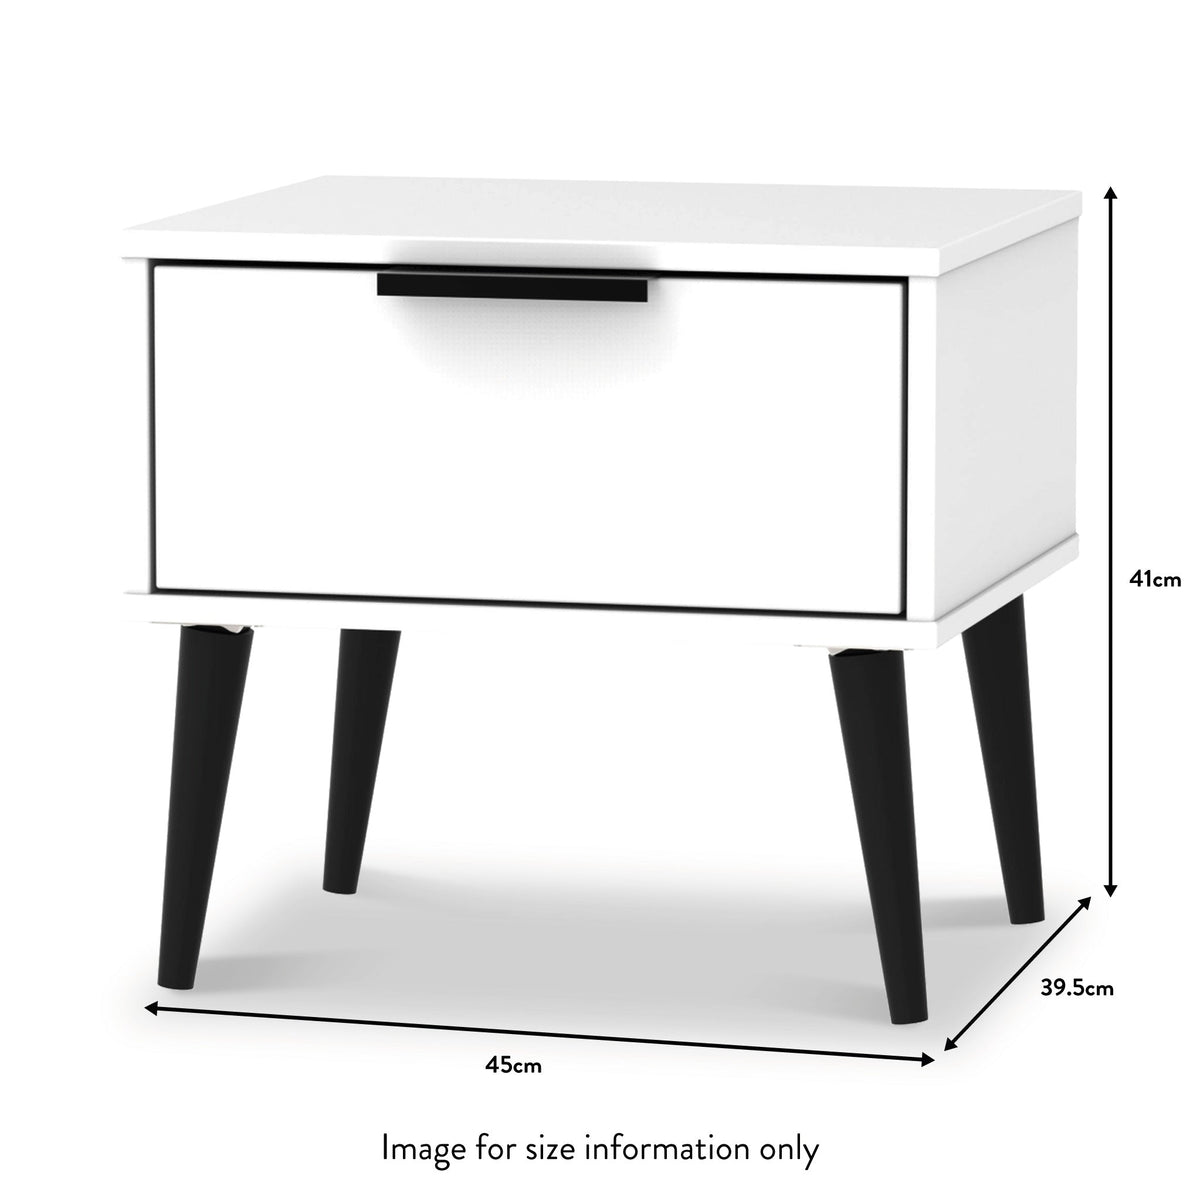 Asher White 1 Drawer Bedside Table dimensions